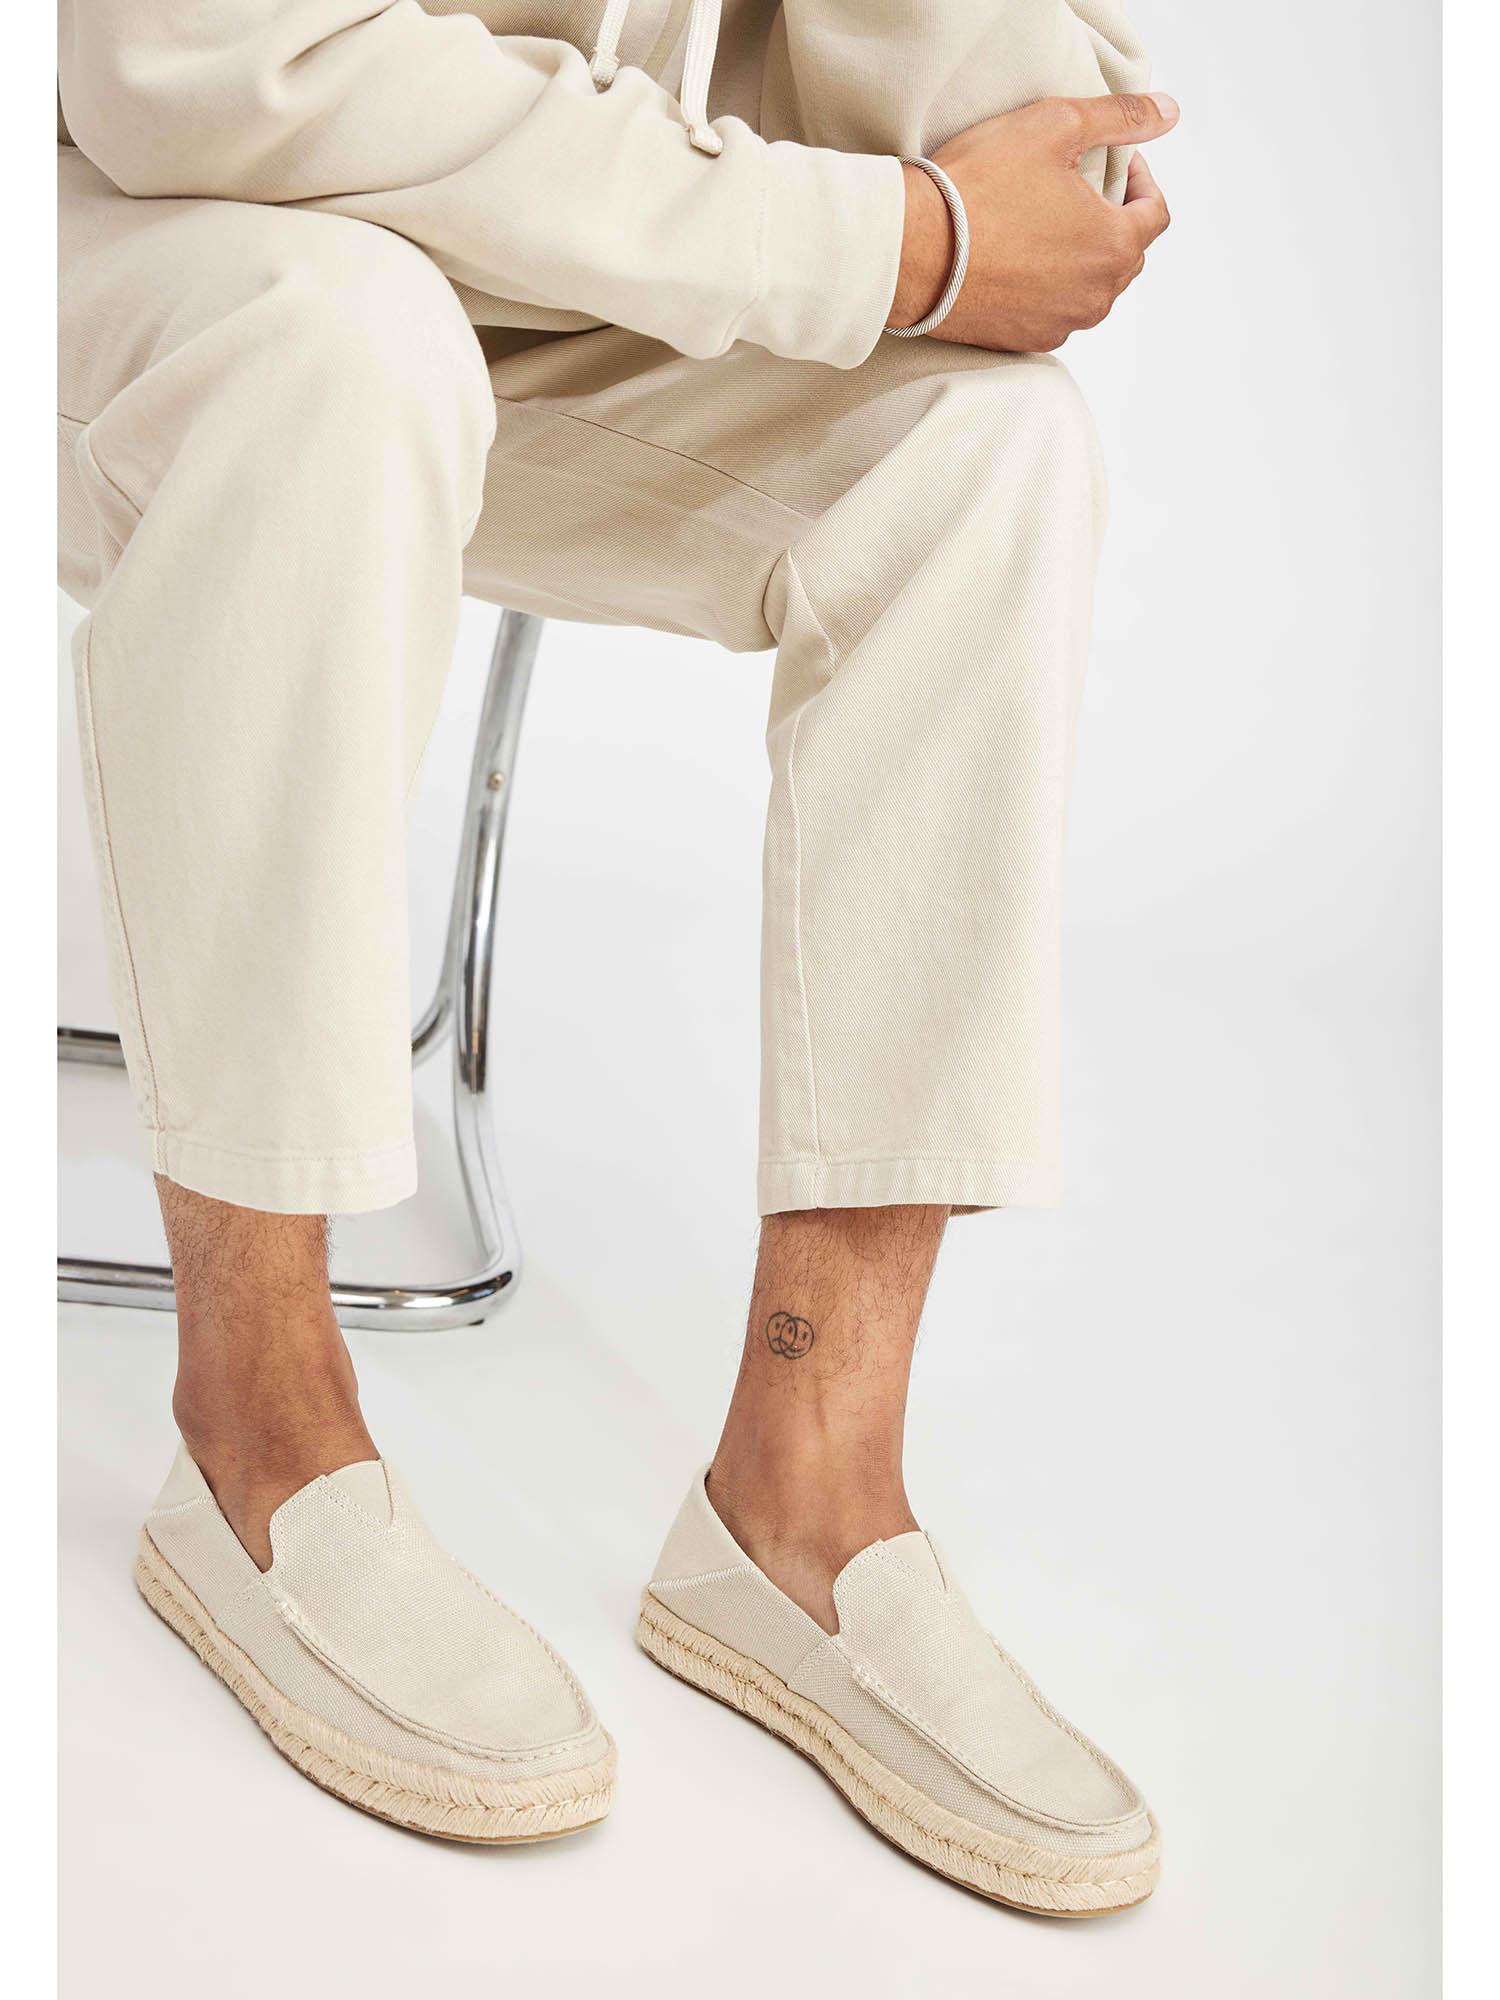 alonso loafers cream suede espadrilles